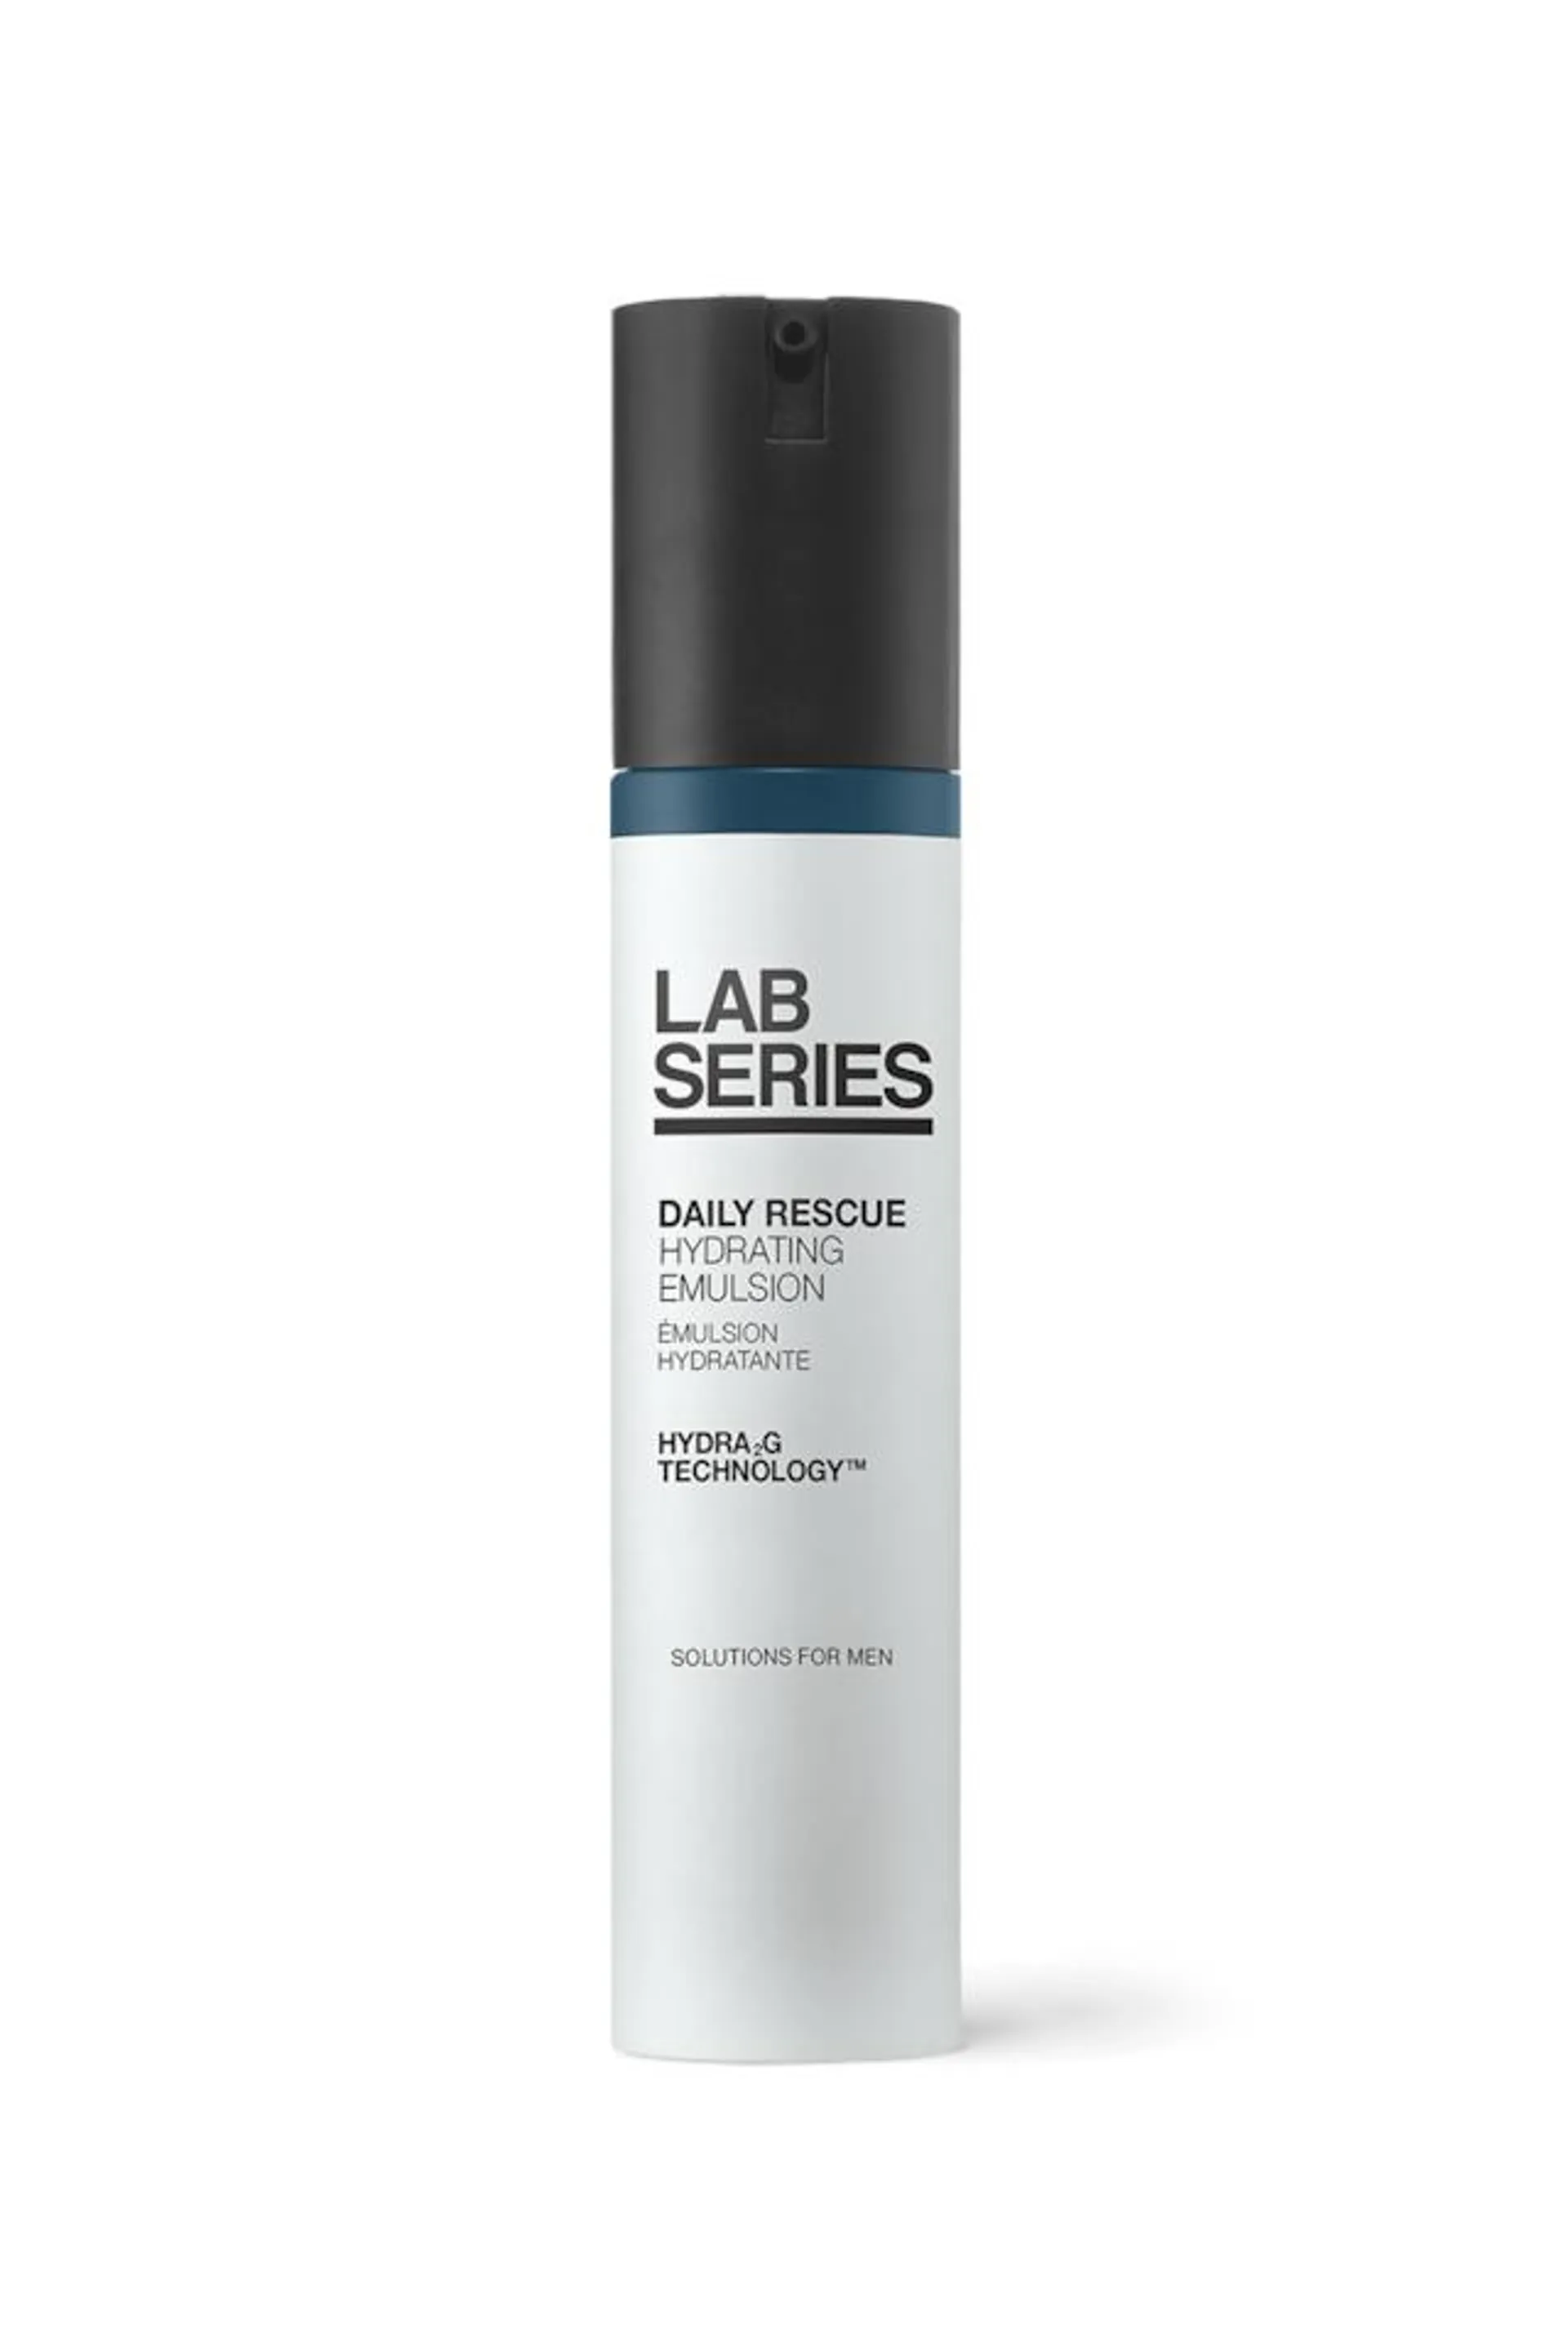 Our hydration powerhouse helps lock in moisture for 72 hours